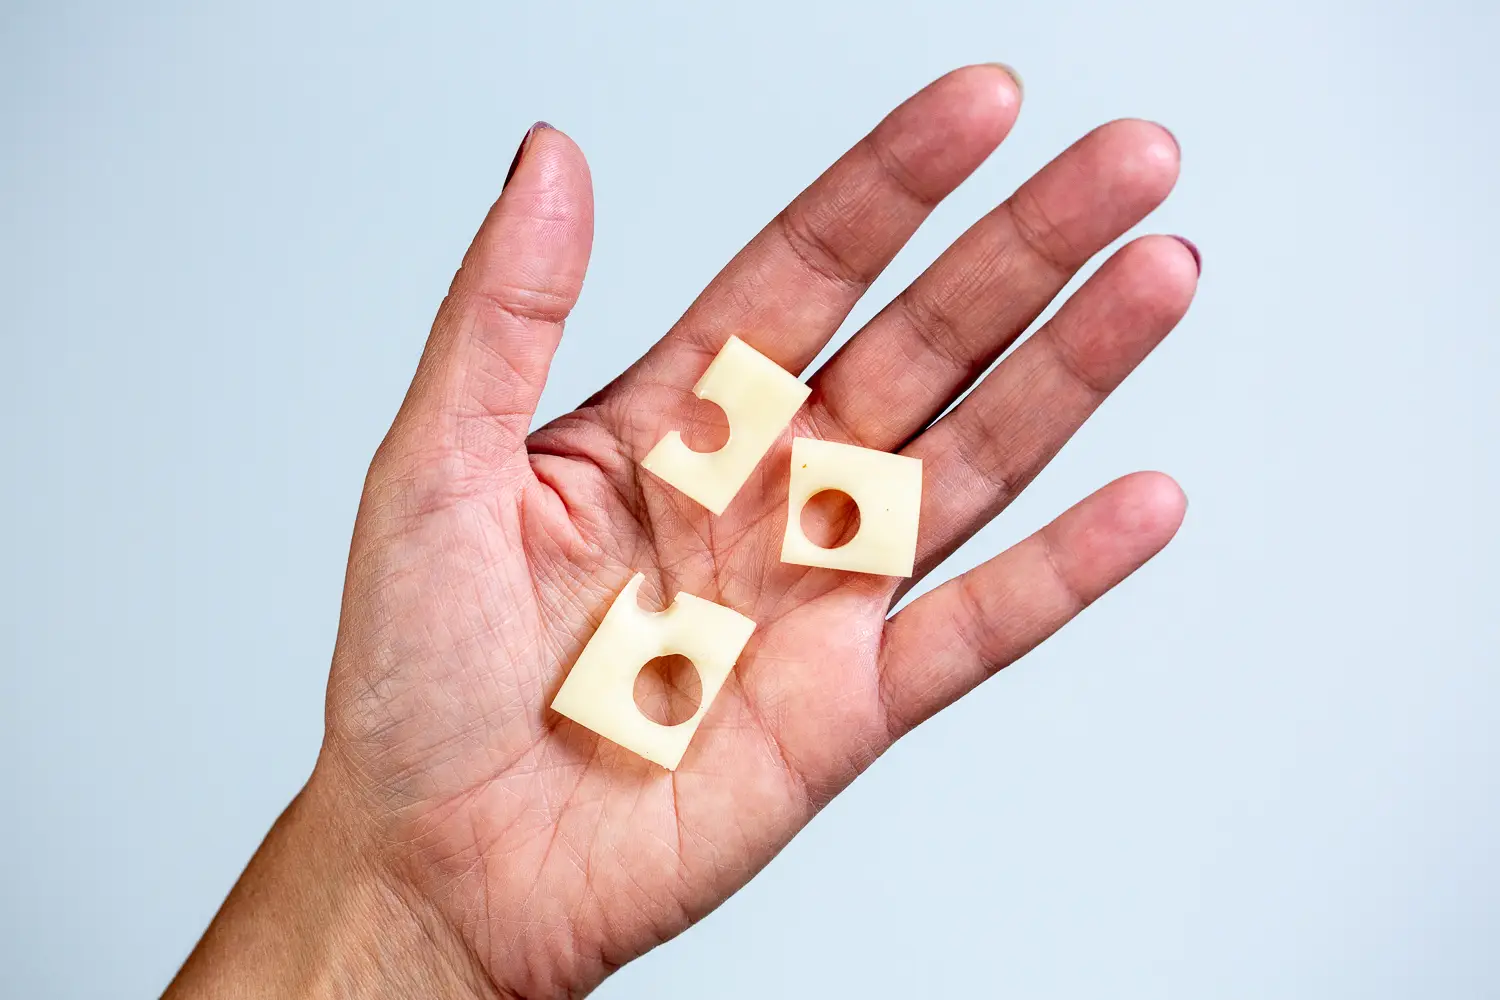 a hand holding three small bite-sized pieces of emmentaler cheese cut from a thin slice